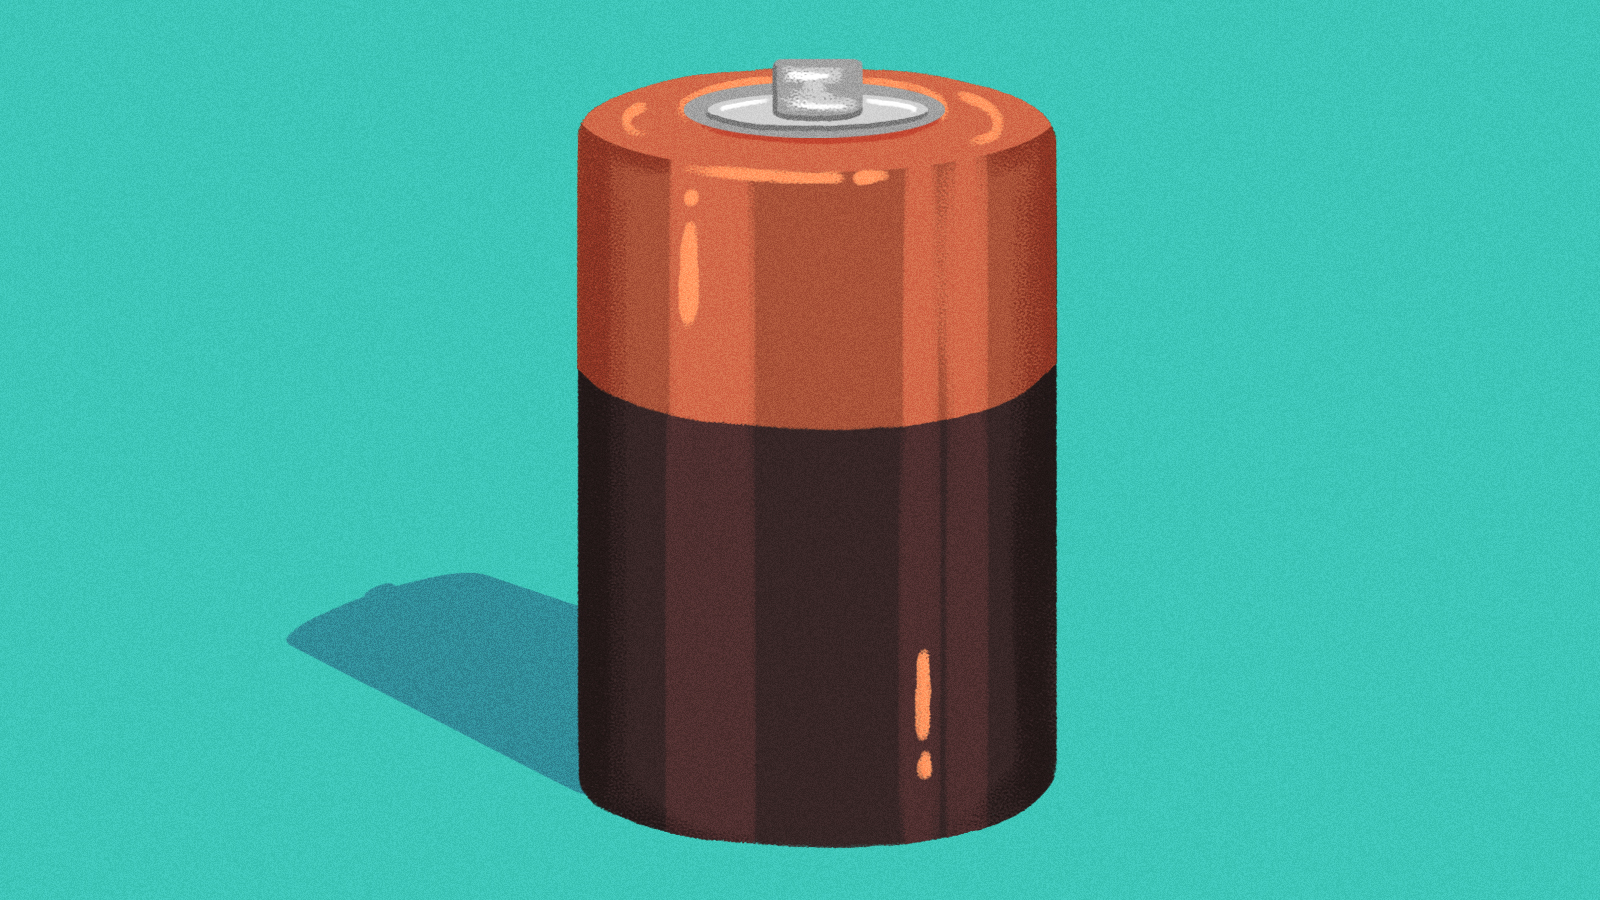 The future will be battery-powered